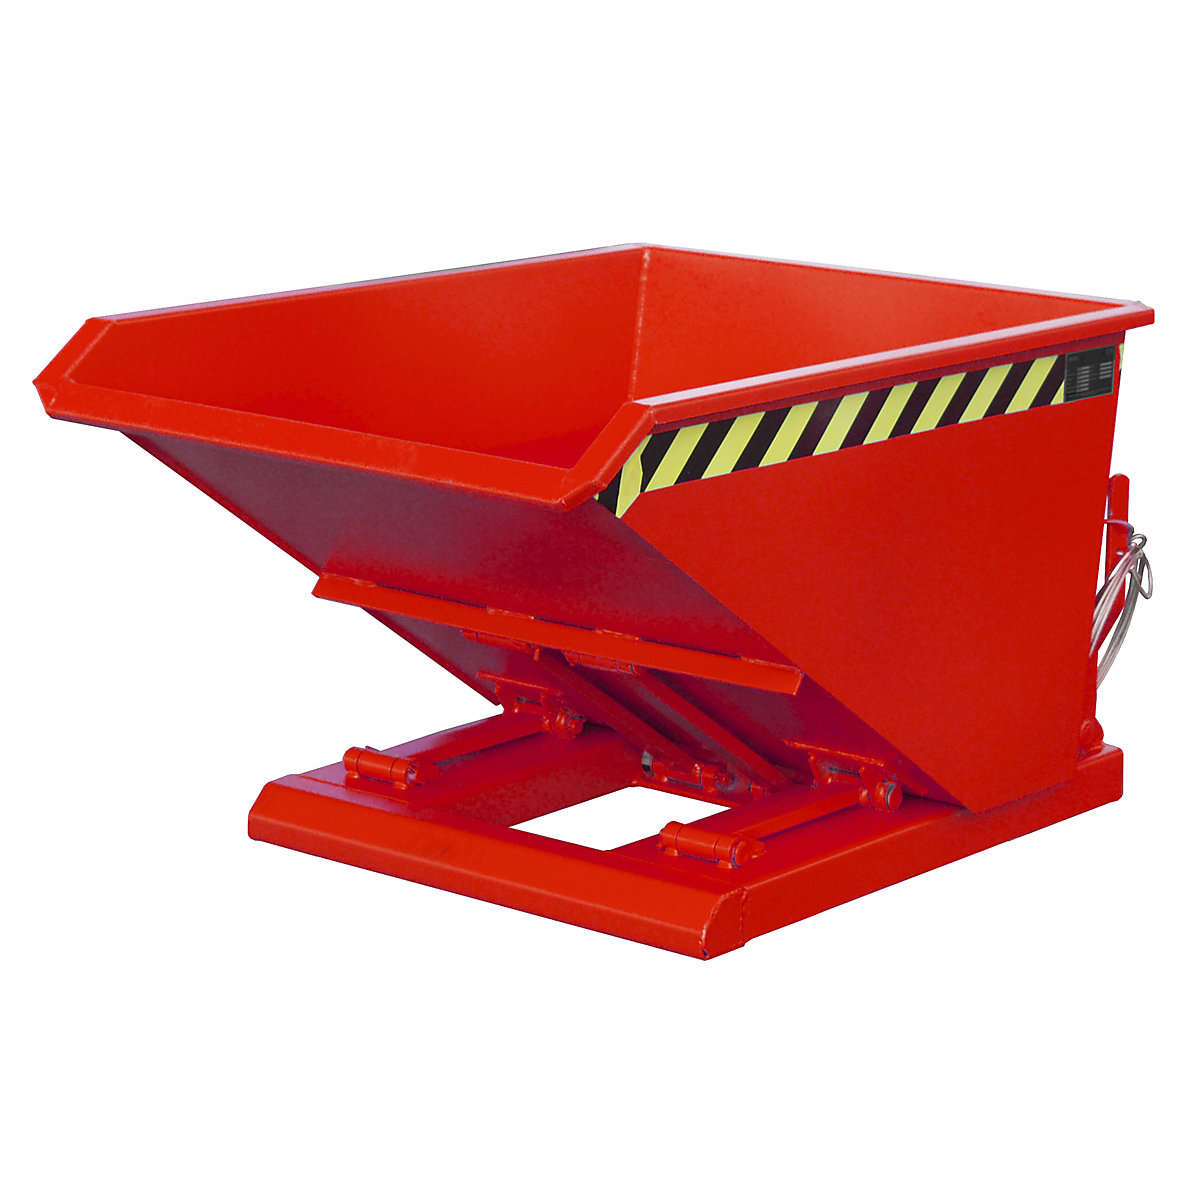 Tilting skip, extremely low overall height, without wheels – eurokraft pro